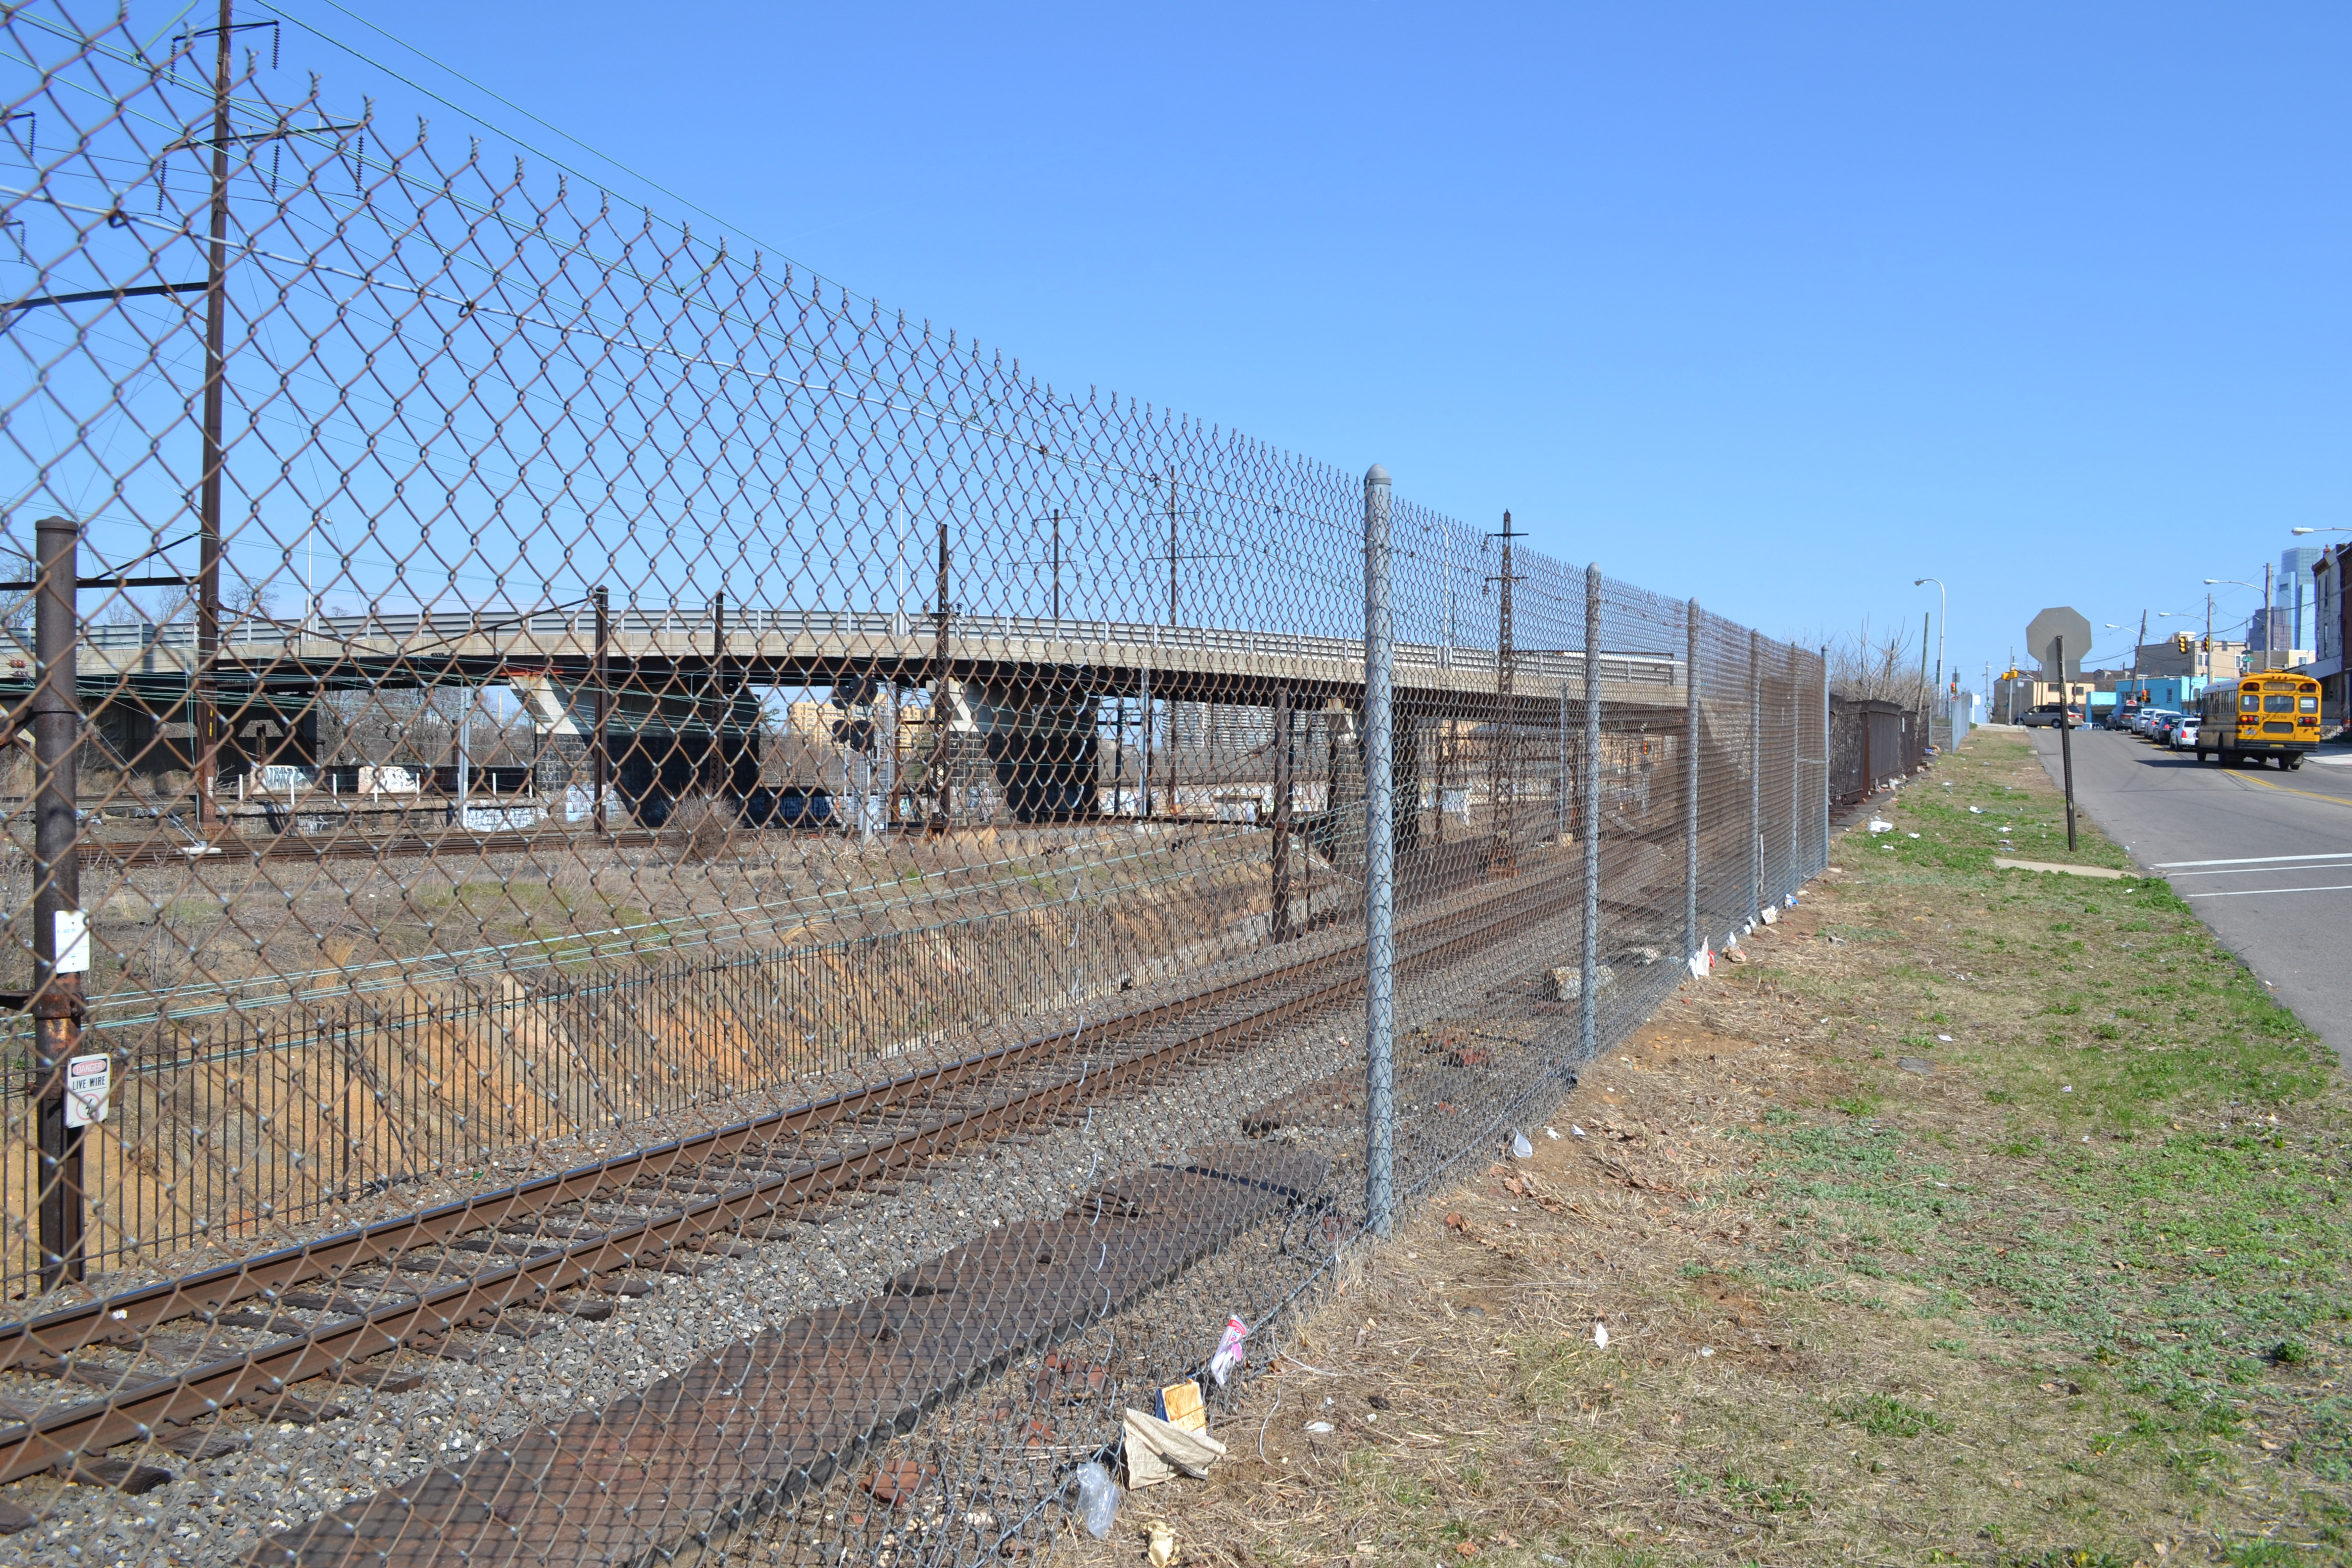 A chain link fence is all that stands between the northern border of Mantua and Amtrak's property